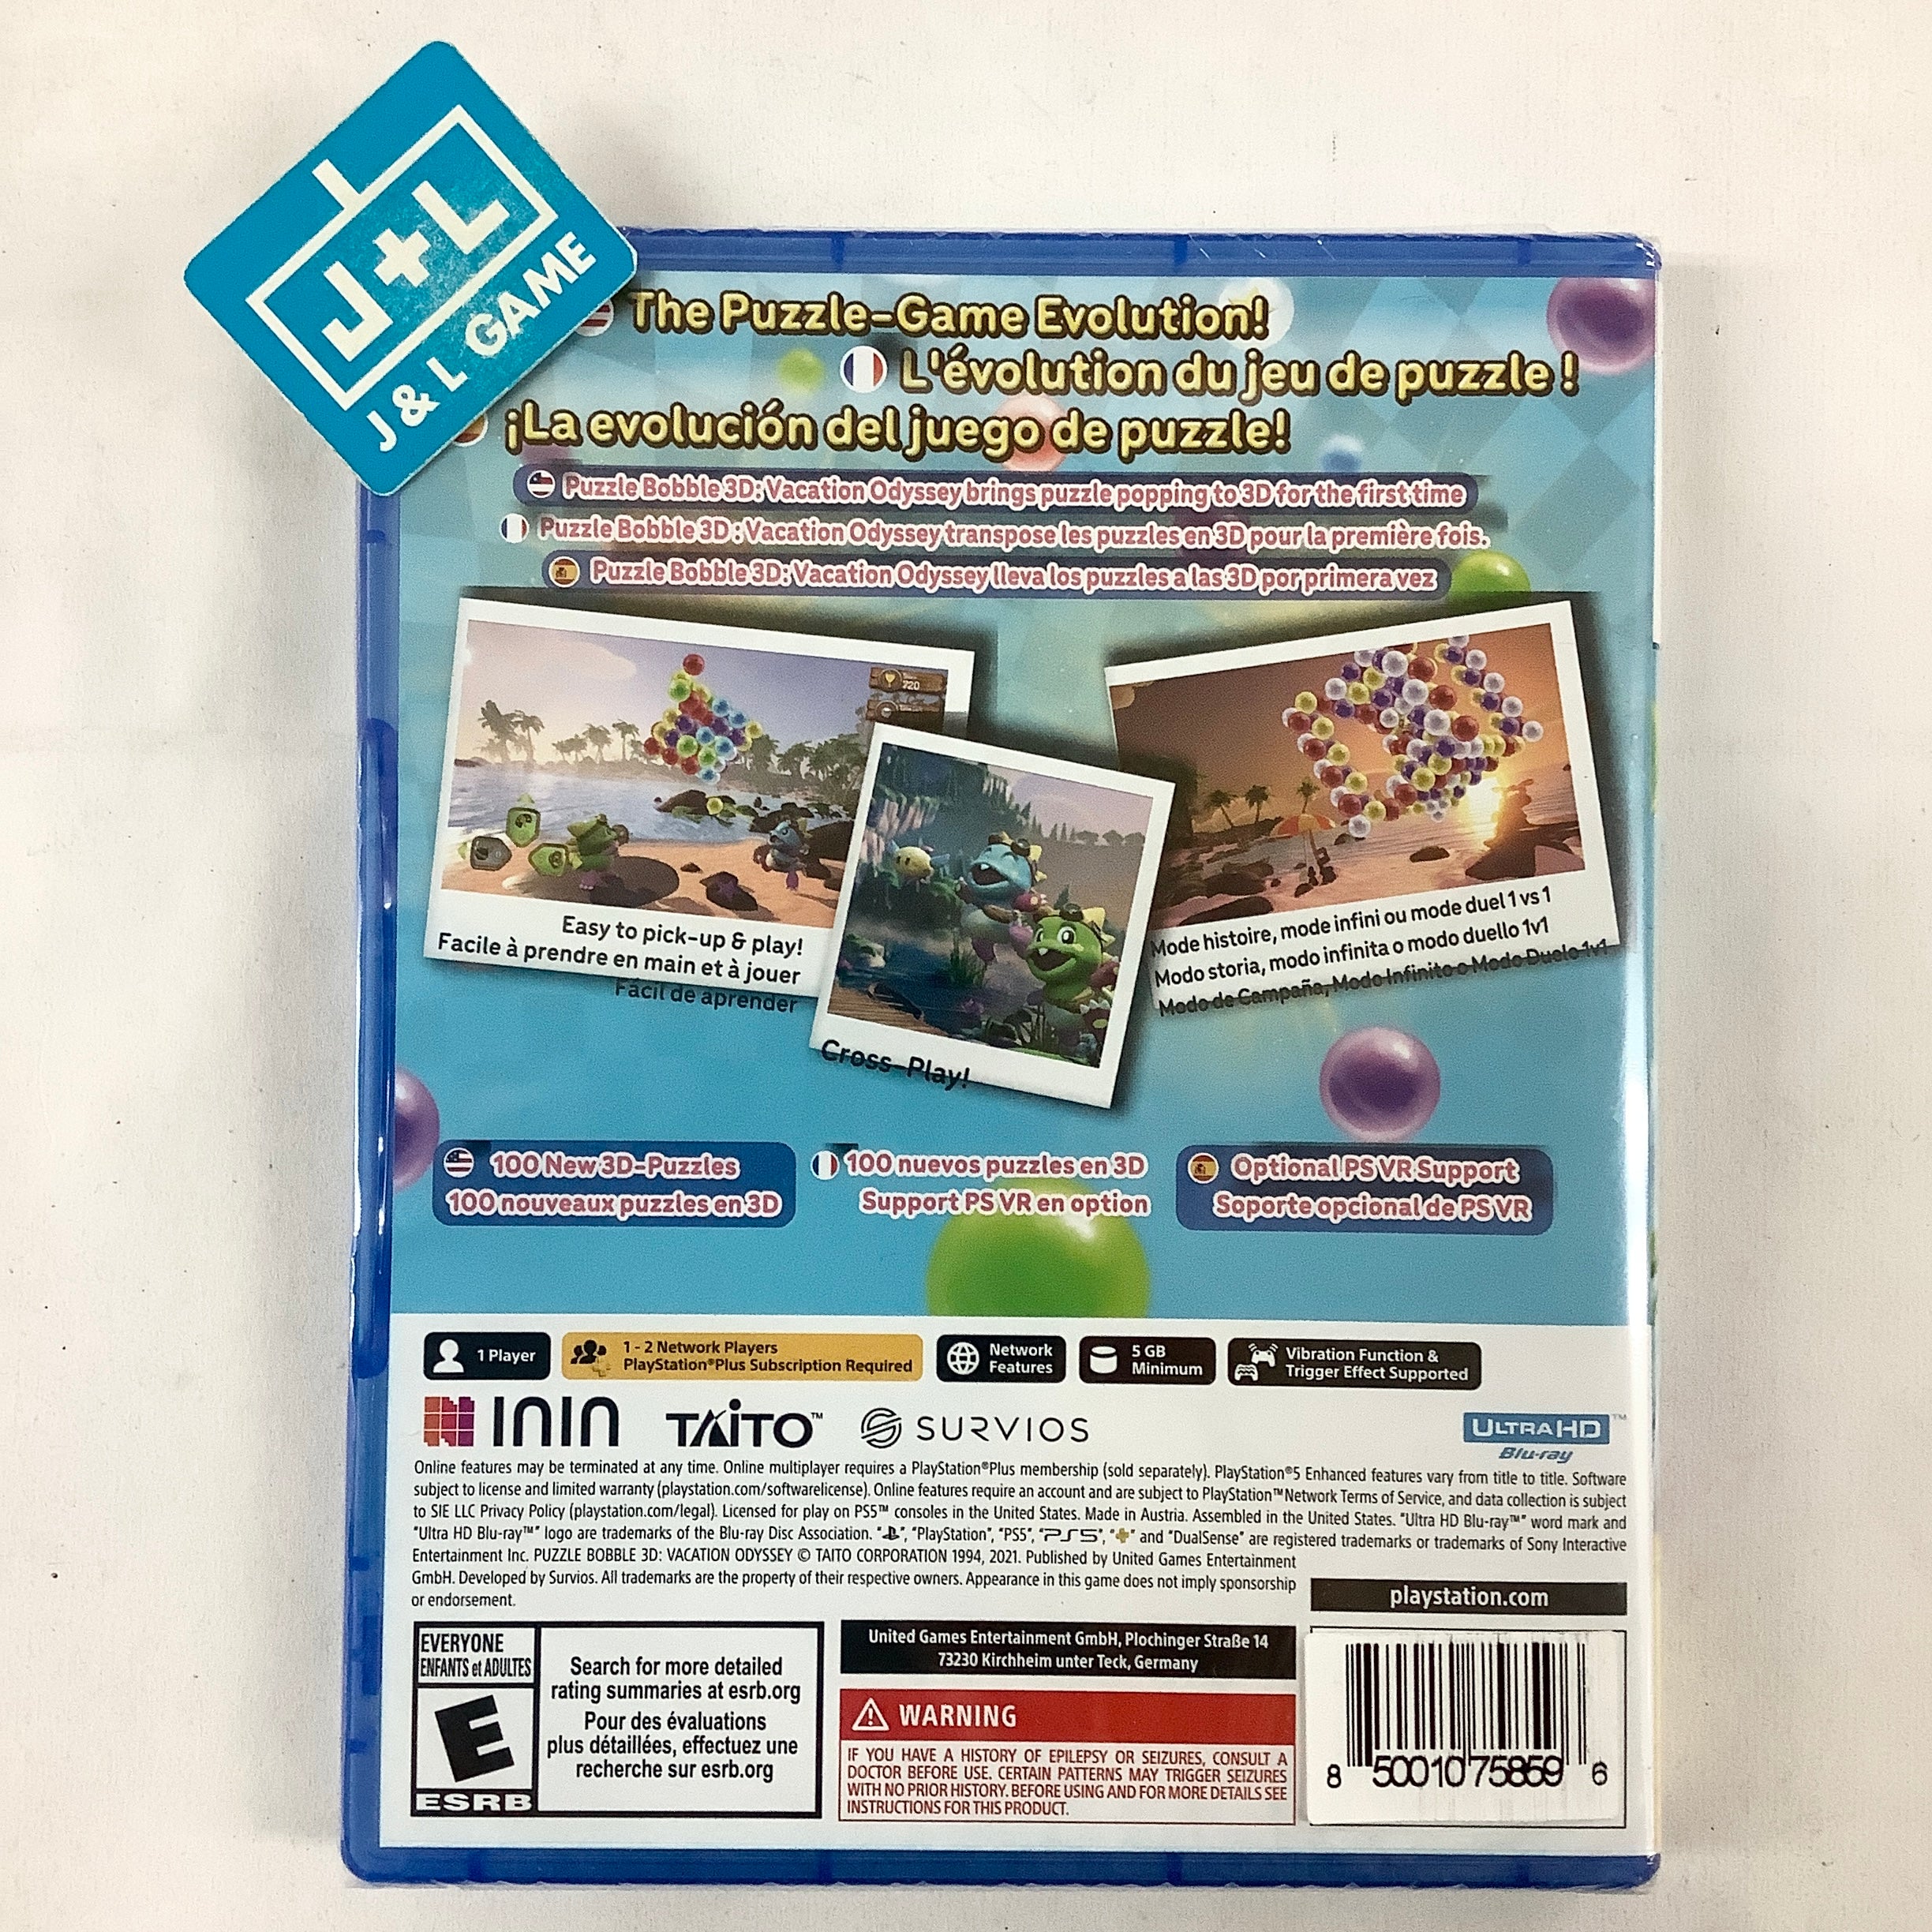 Puzzle Bobble 3D: Vacation Odyssey - (PS5) PlayStation 5 Video Games ININ Games   